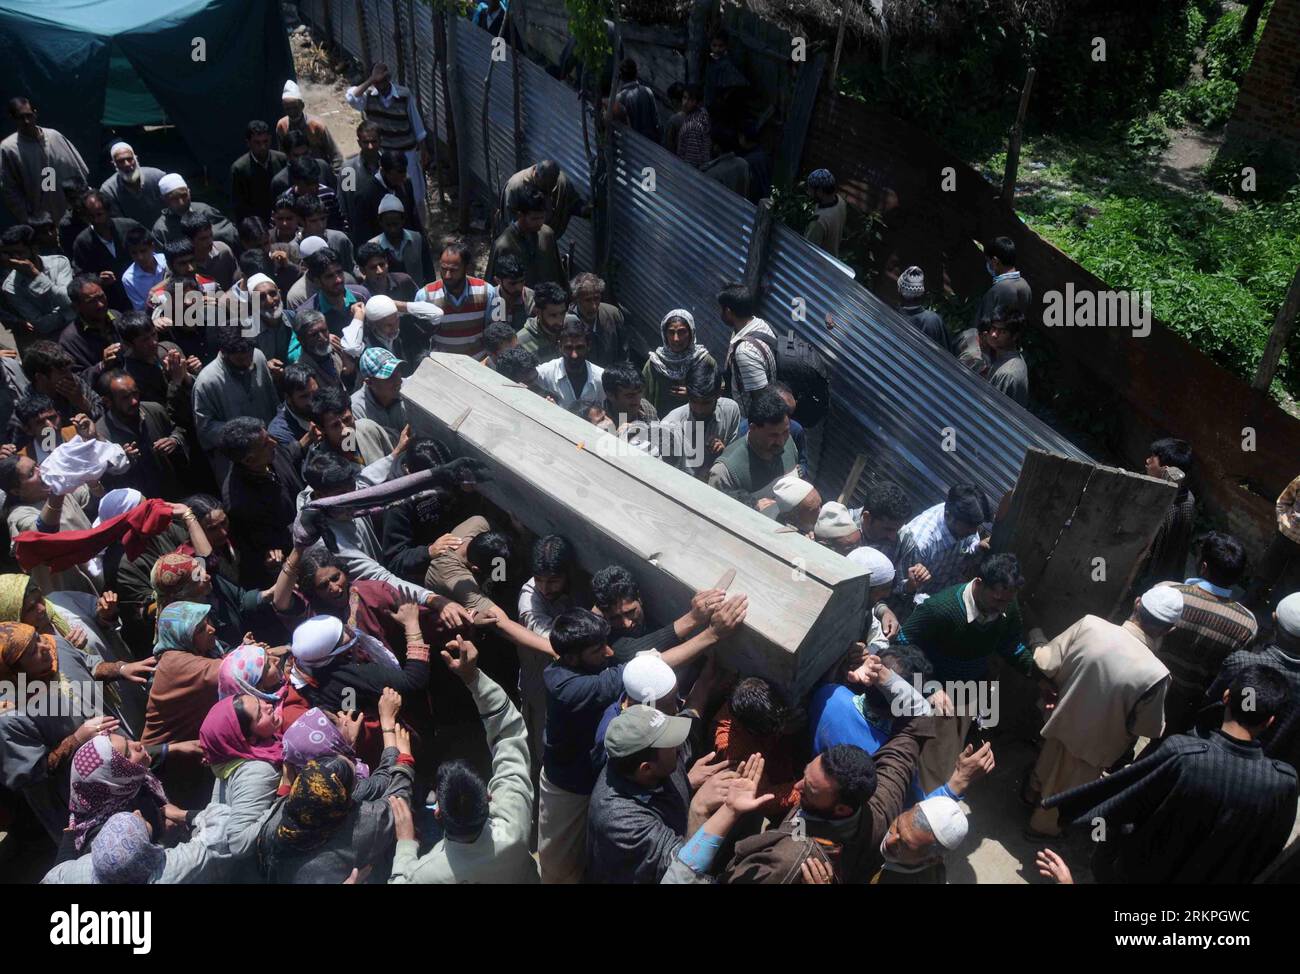 Bildnummer: 57995574  Datum: 16.05.2012  Copyright: imago/Xinhua (120516) -- SRINAGAR, May 16, 2012 (Xinhua) -- carry coffin of Nazir Ahmad Najar during his funeral at village Surasyar in Badgam district, Srinagar, summer capital of Indian-controlled Kashmir, May 16, 2012. Two persons were killed and 37 injured when a bus skidded off the road and fell into a gorge. Deadly road accidents in Indian-controlled Kashmir are often caused by overloading the vehicles, the bad condition of roads and reckless driving. (Xinhua /Javed Dar) (zyw) INDIA-KASHMIR-SRINAGAR-ACCIDENT PUBLICATIONxNOTxINxCHN Gesel Stock Photo